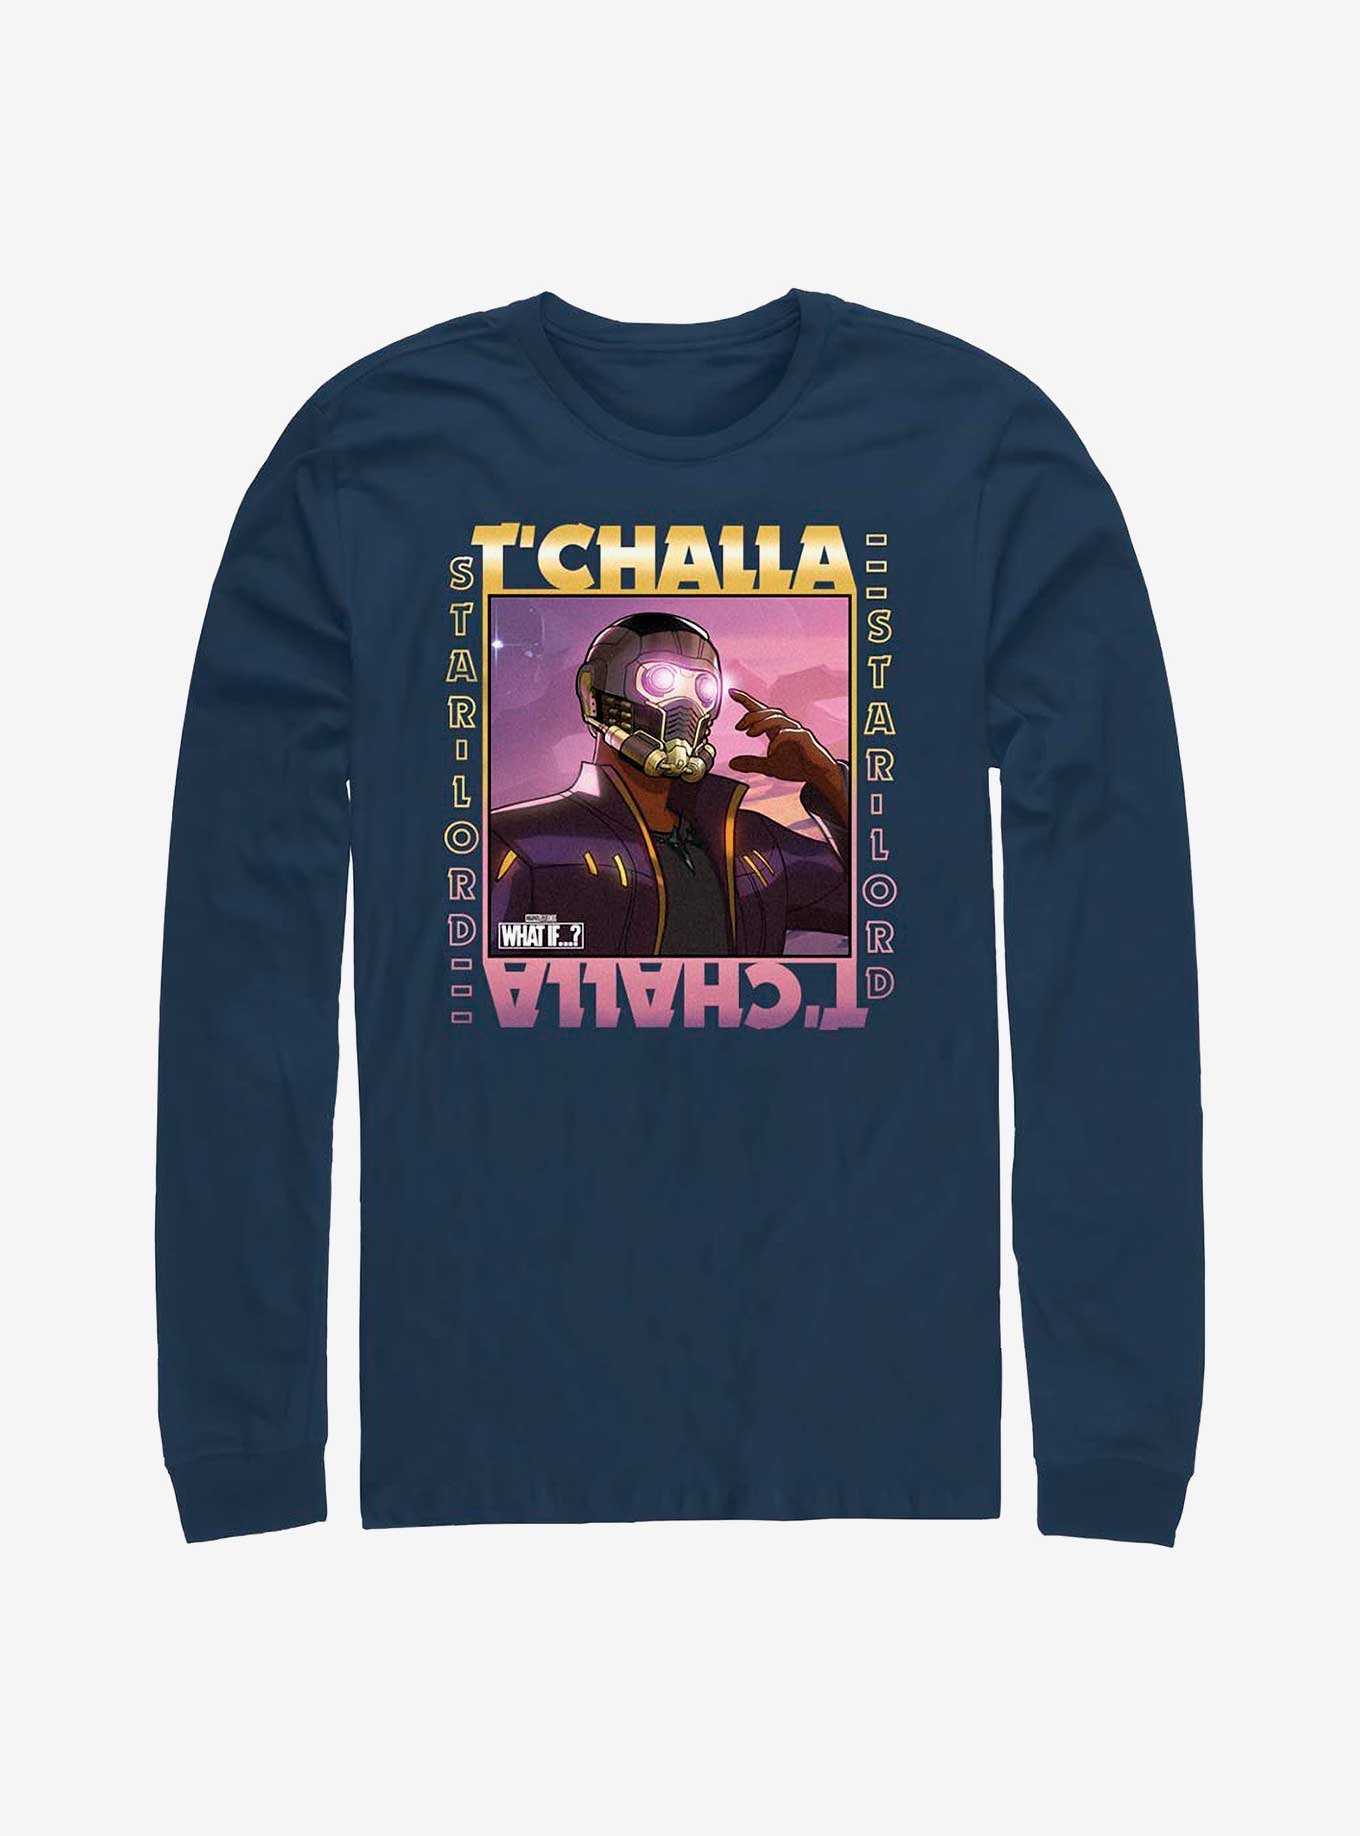 Marvel What If...? T'Challa Star-Lord Long-Sleeve T-Shirt, , hi-res